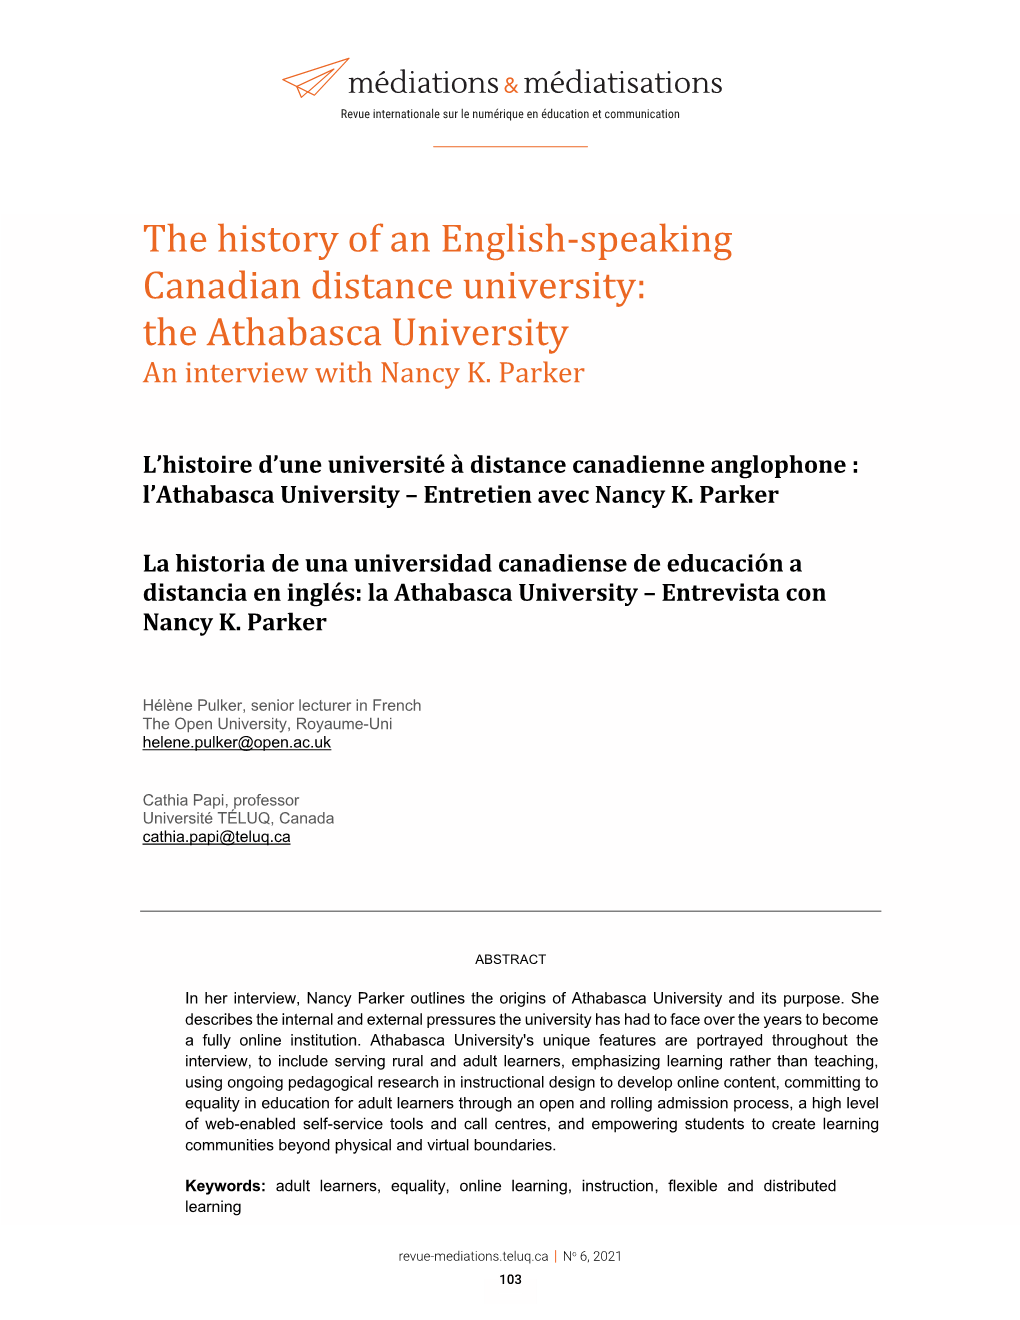 The History of an English-Speaking Canadian Distance University: an Ithe Nterview with Nancy K